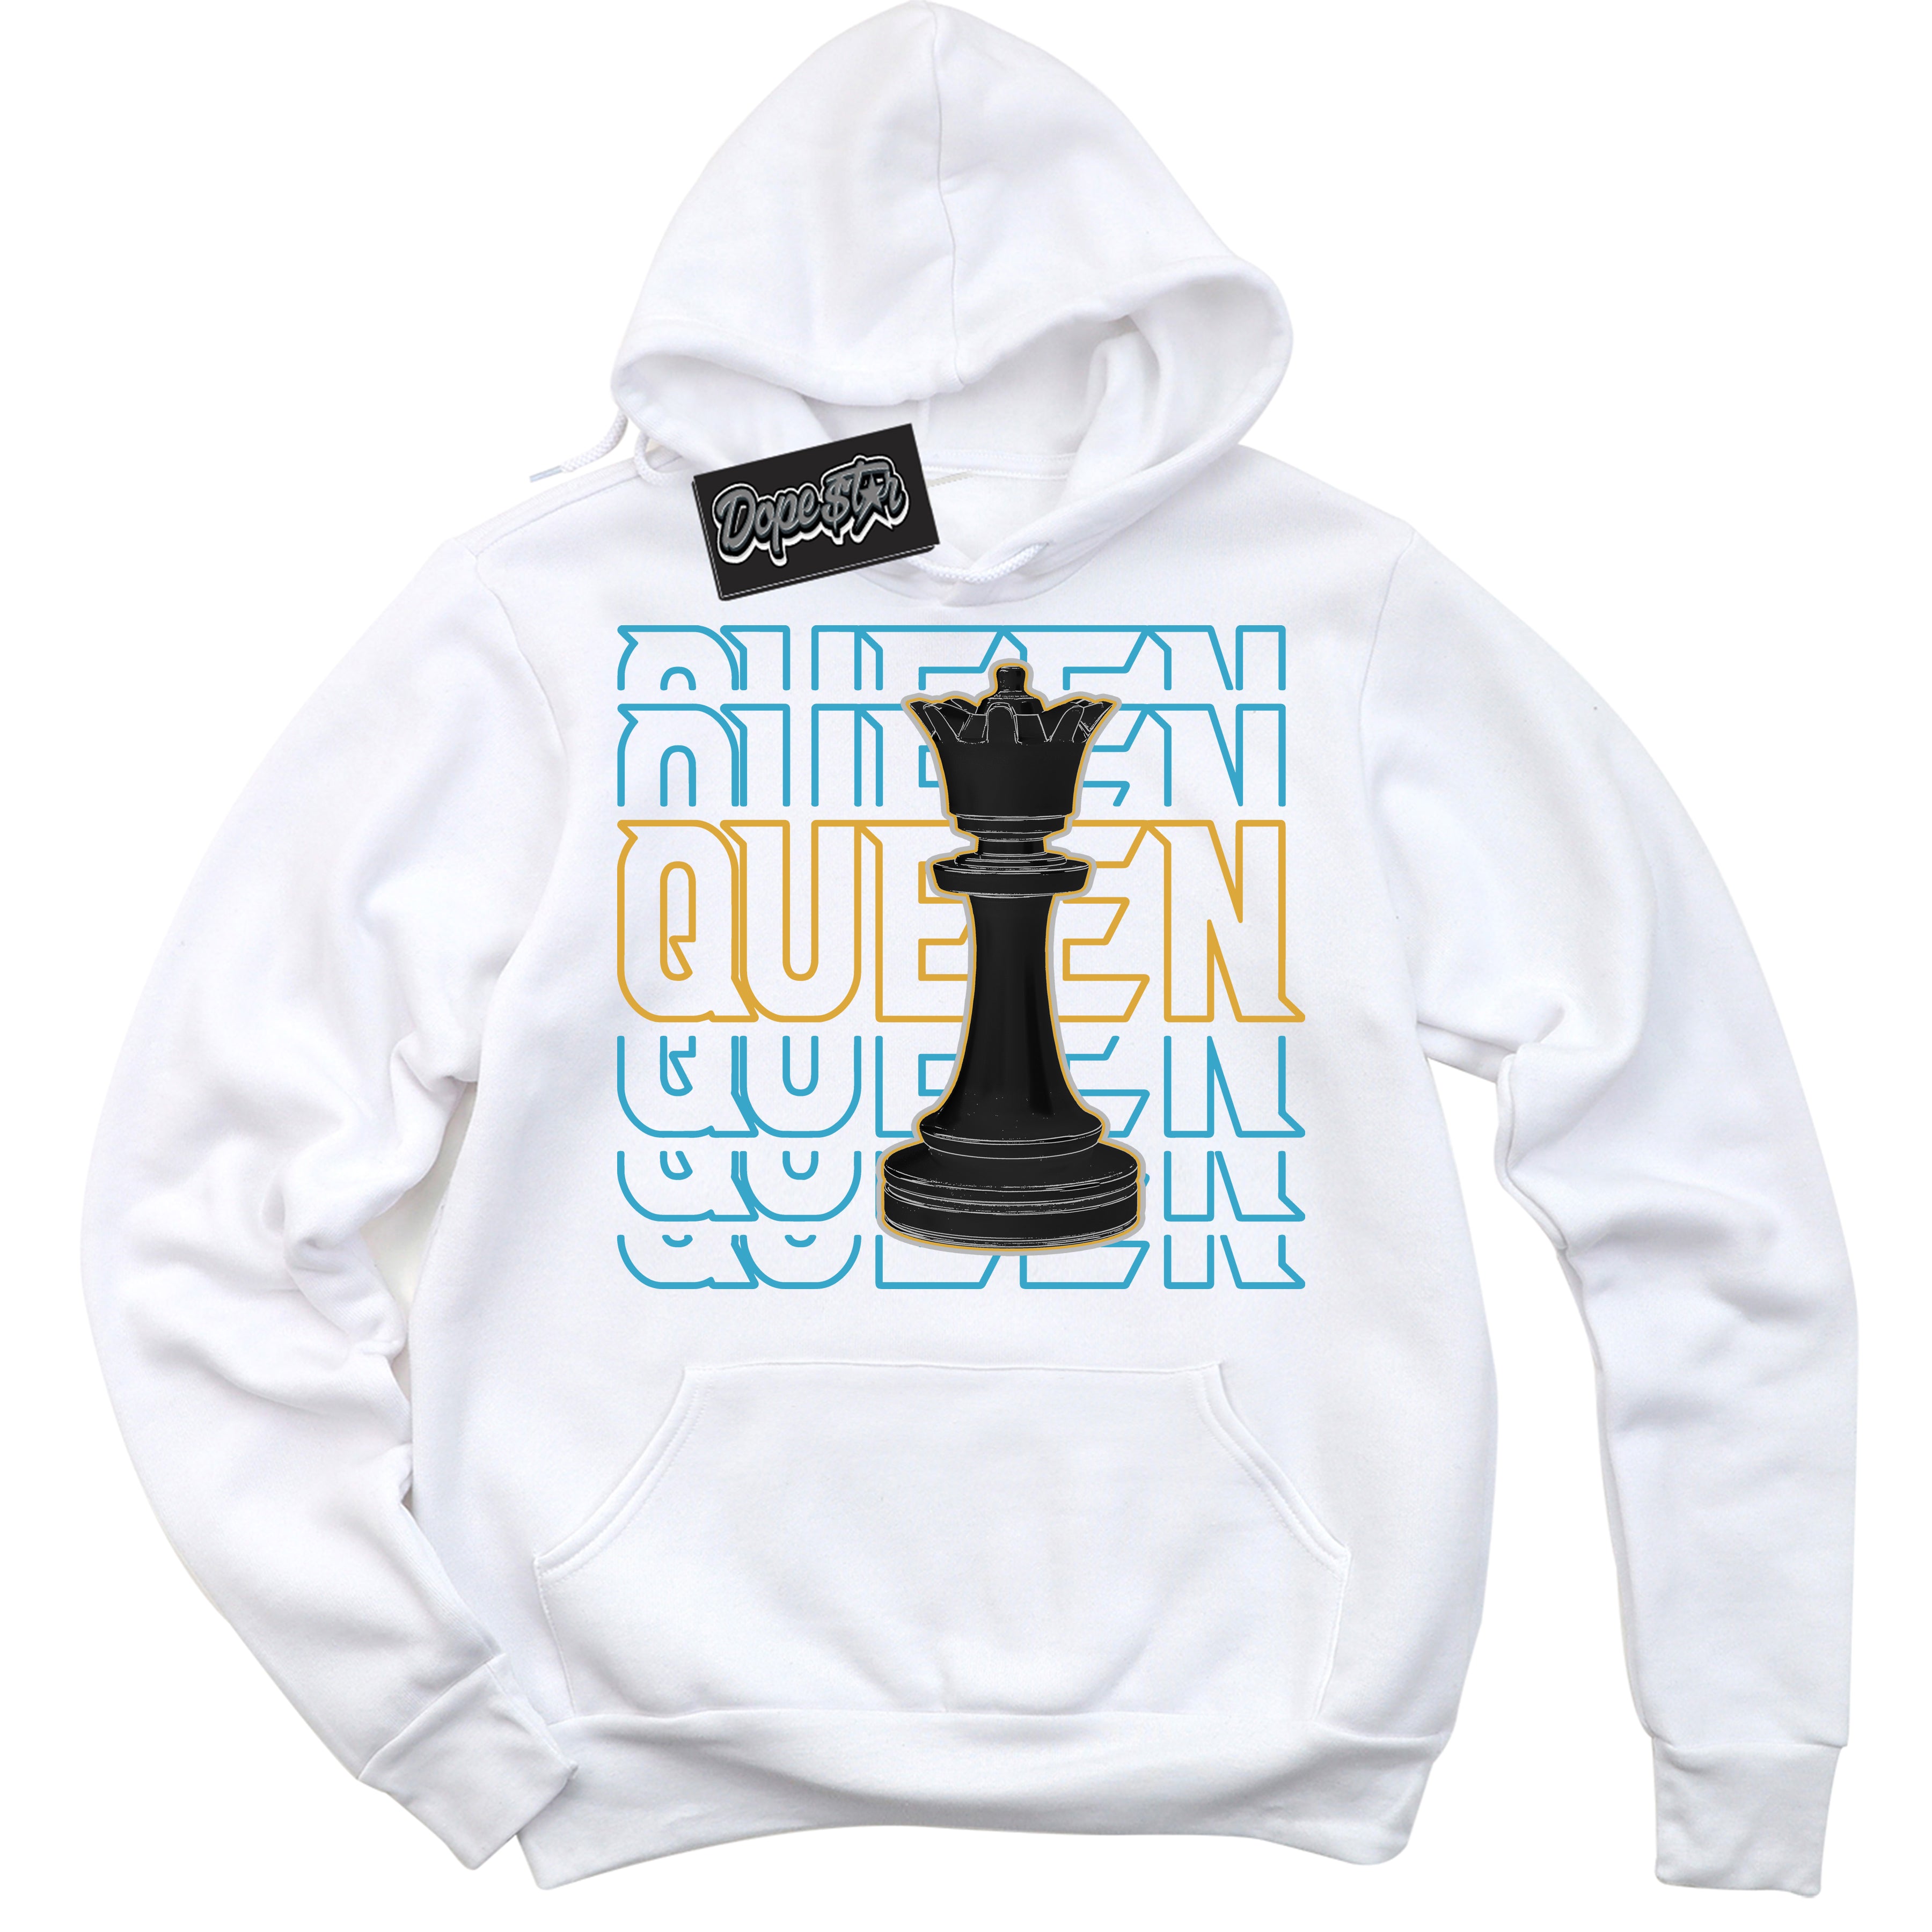 Cool White Hoodie with “ Queen Chess ”  design that Perfectly Matches Aqua 5s Sneakers.